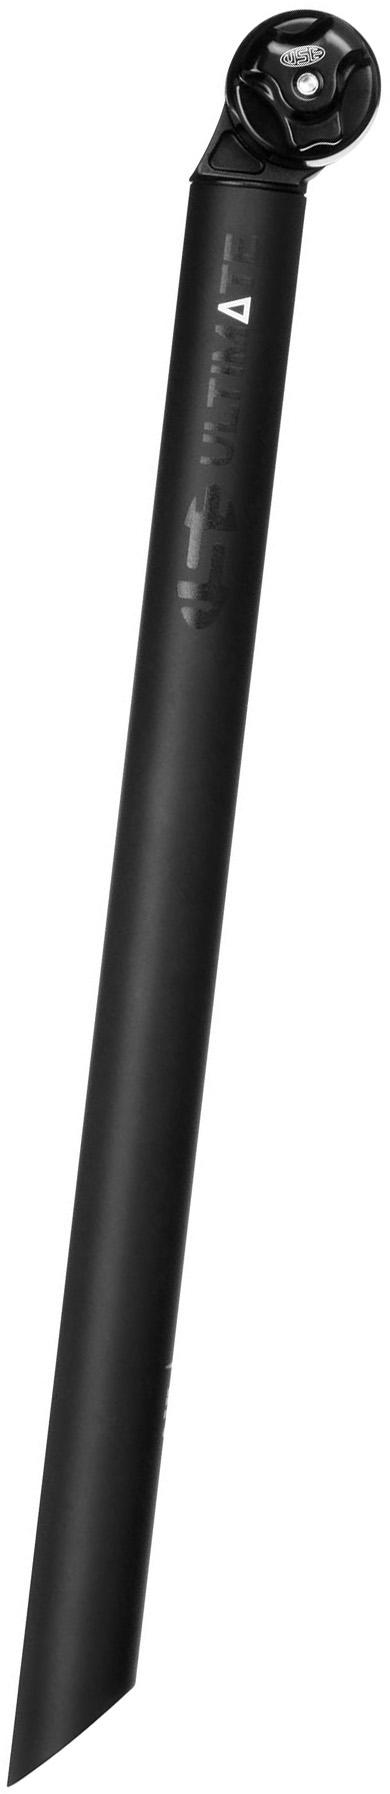 Ultimate Use Duro Carbon Seat Post - Black